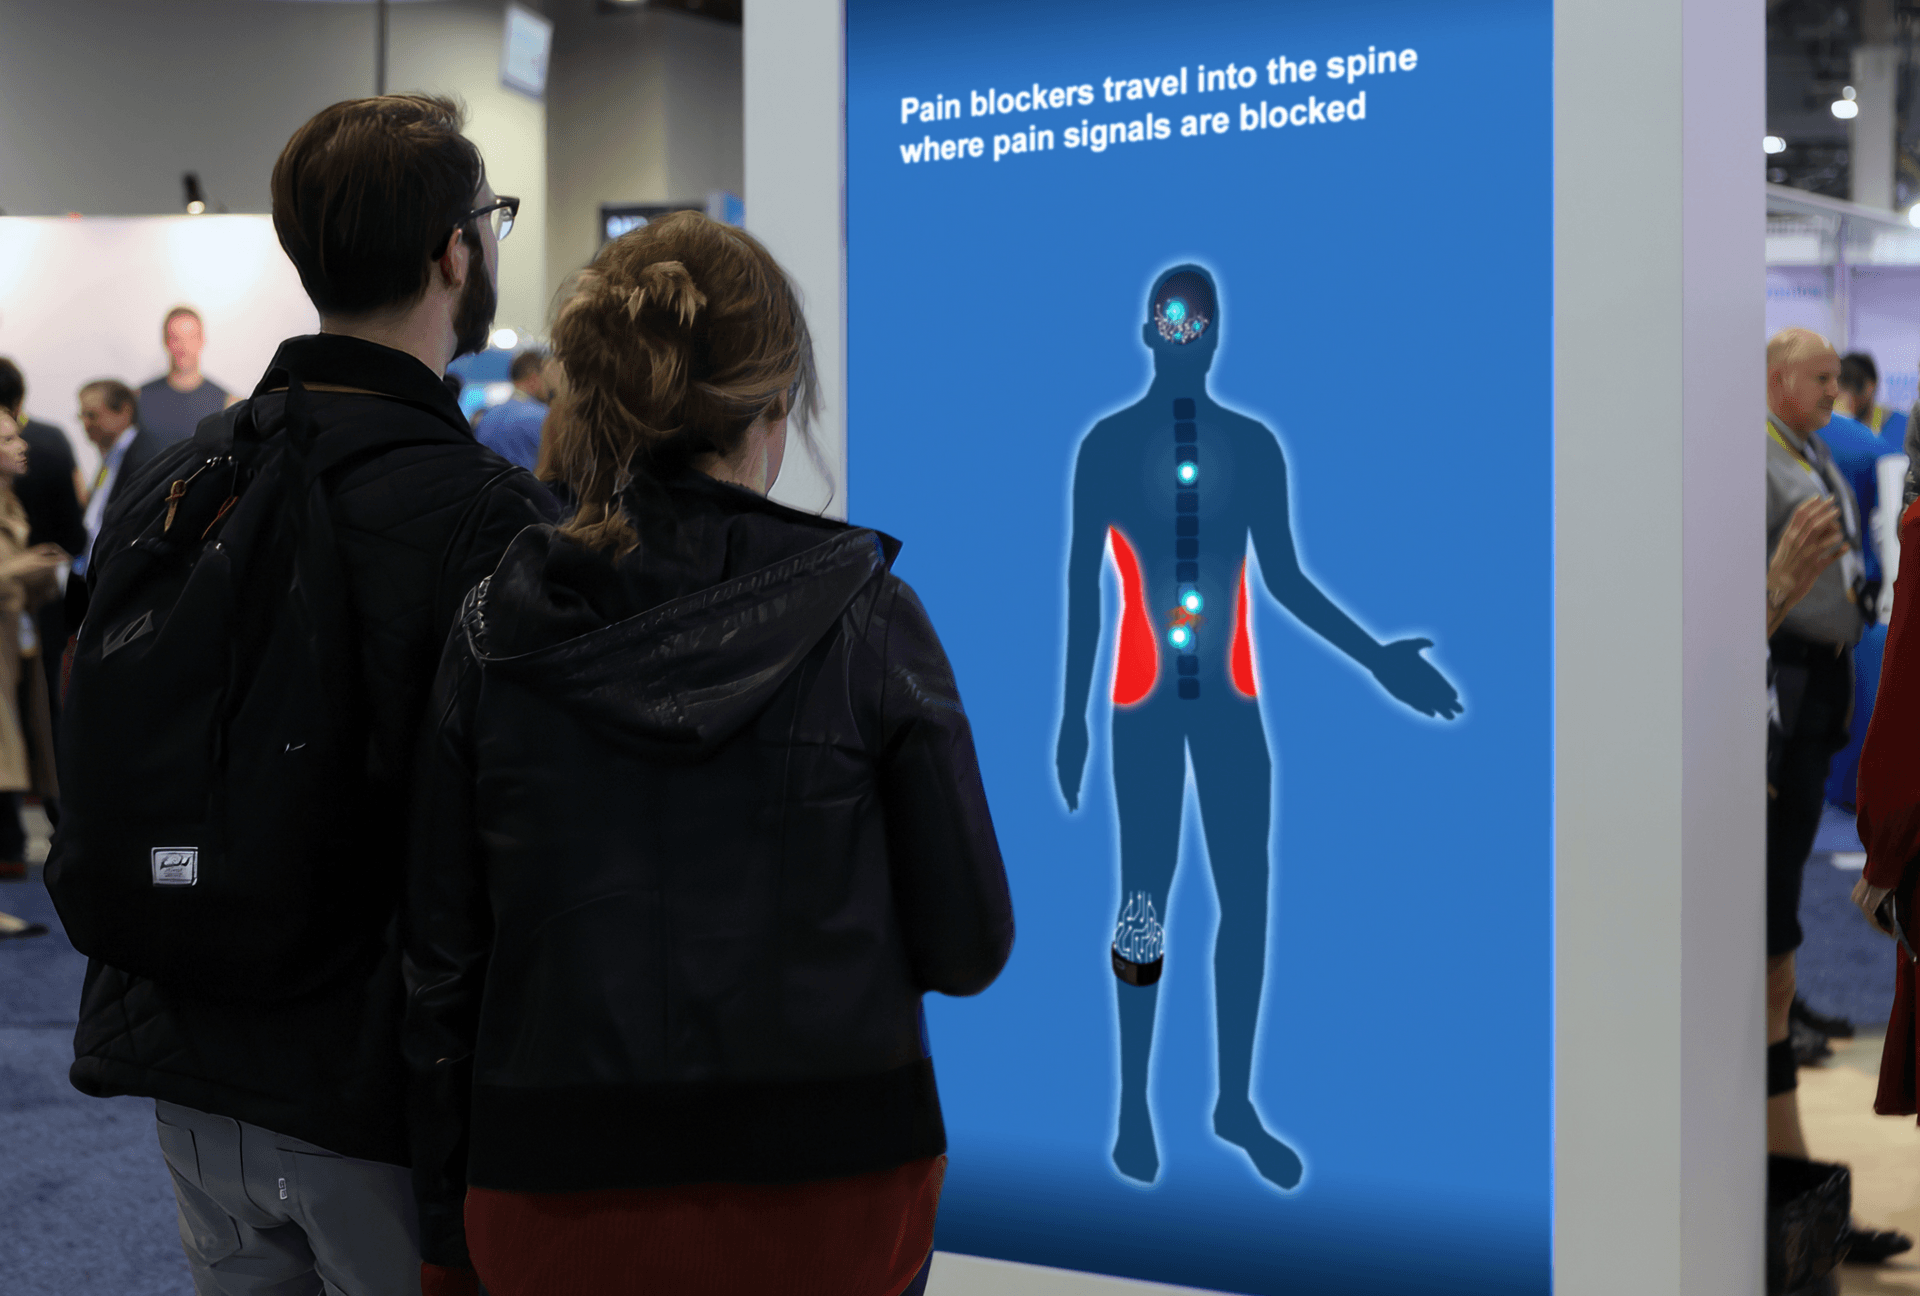 At a trade show two individuals stand in front of 90″ screen featuring the Quell Interactive. On the screen is a silhouette with highlighted areas showing pain areas and signals traveling up the spine.